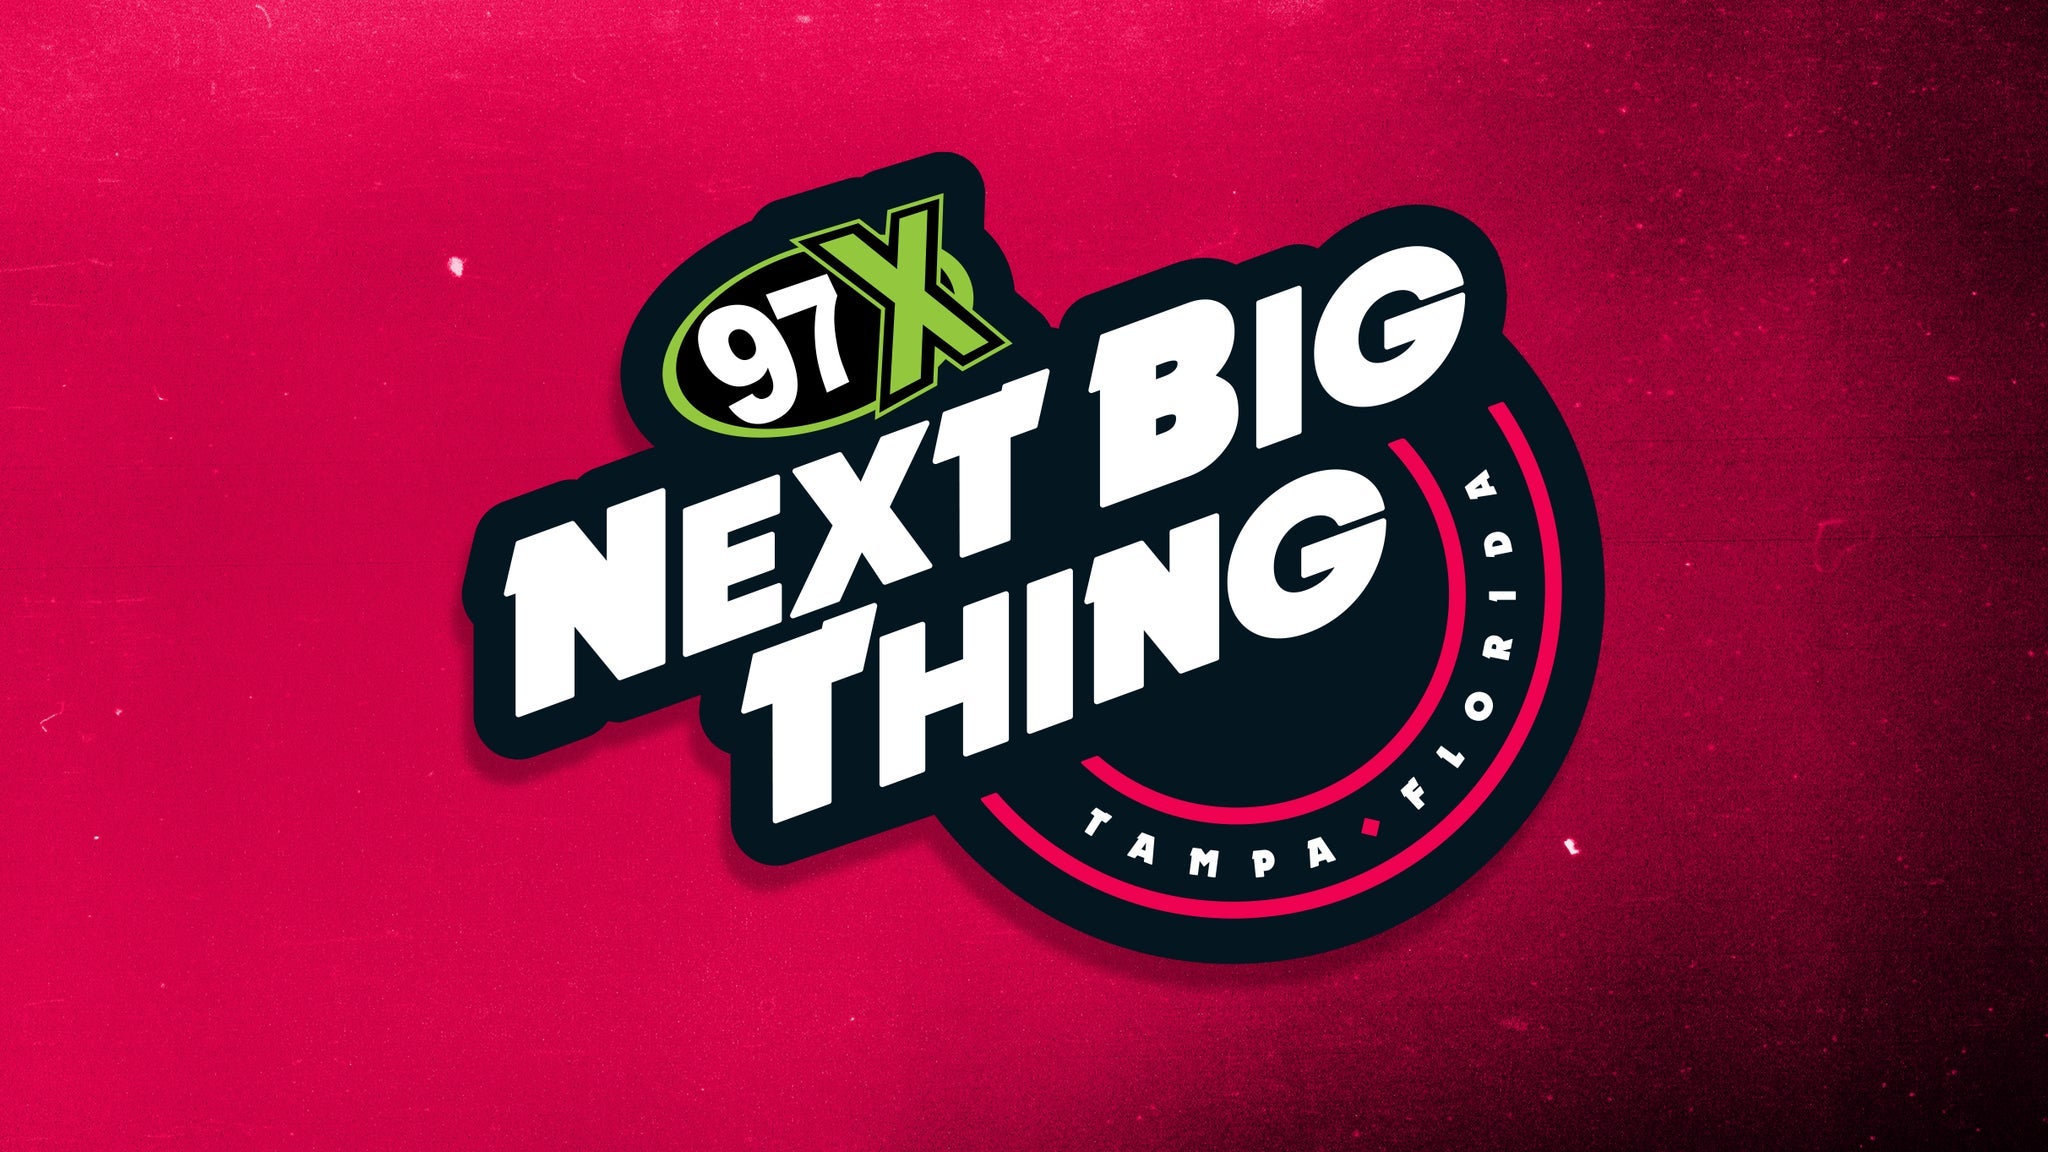 97x Next Big Thing - VIP Experience - Day 2 (Sunday) in Tampa promo photo for Early Access presale offer code